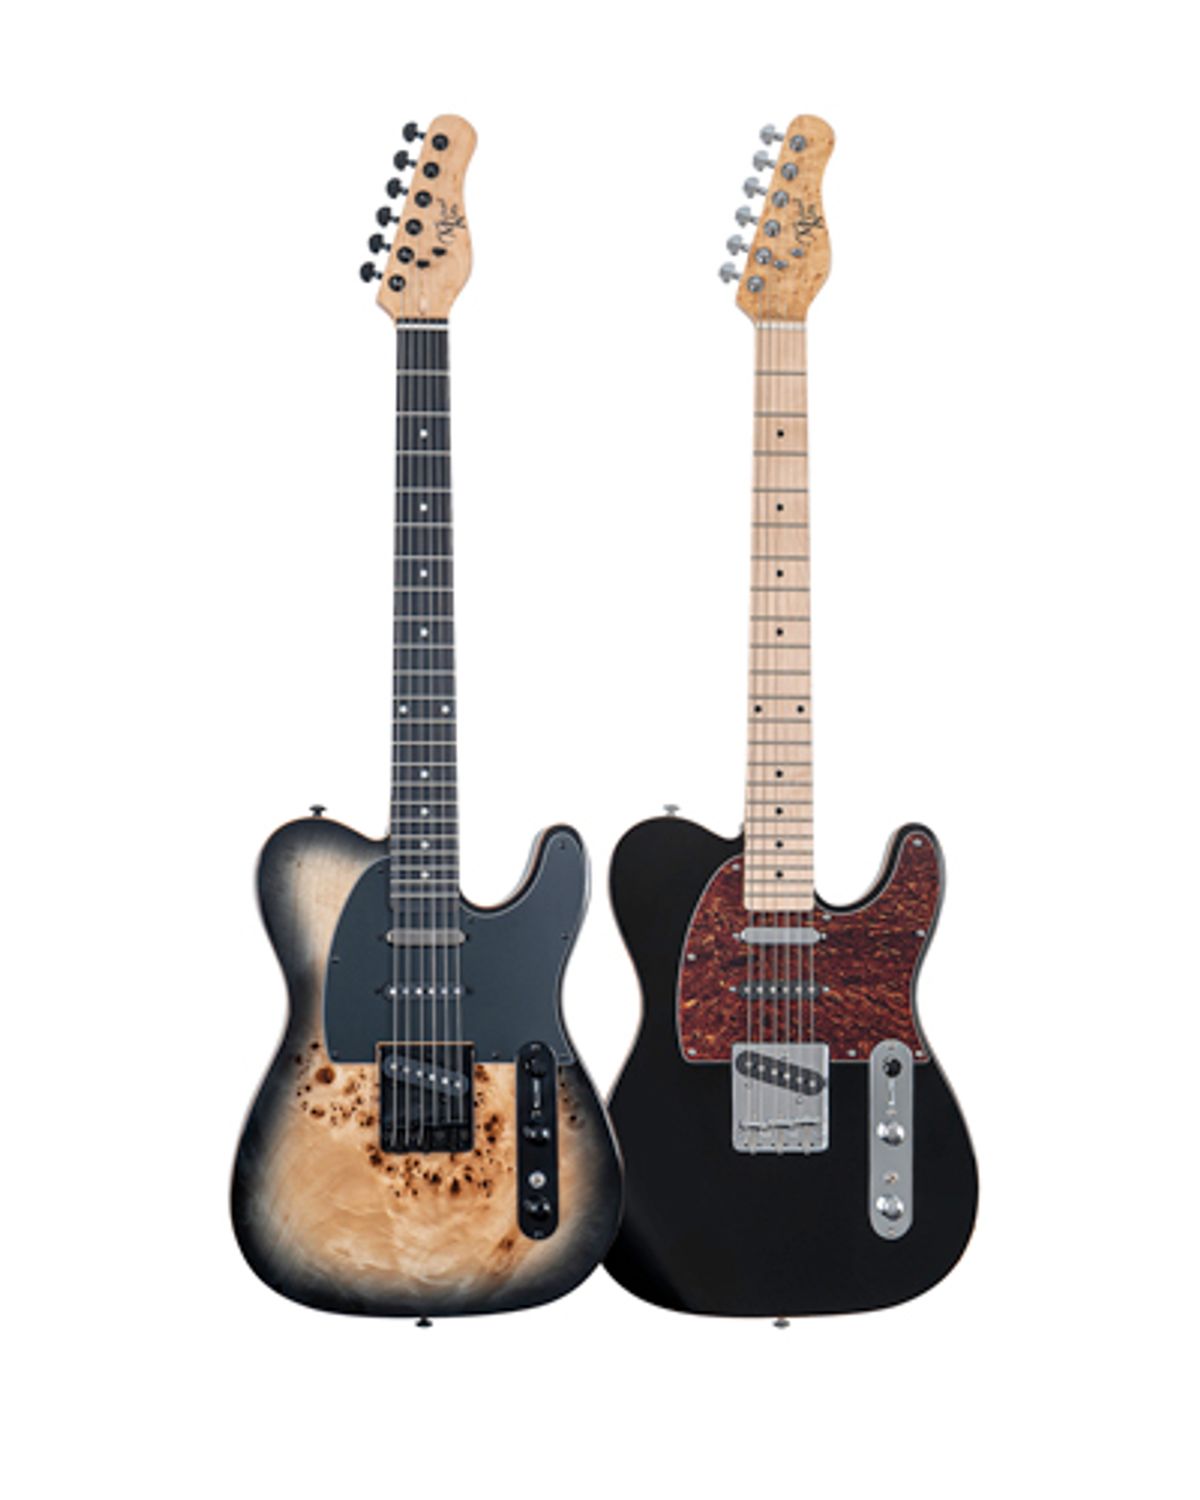 Michael Kelly Guitars Introduces New Triple 50 Model